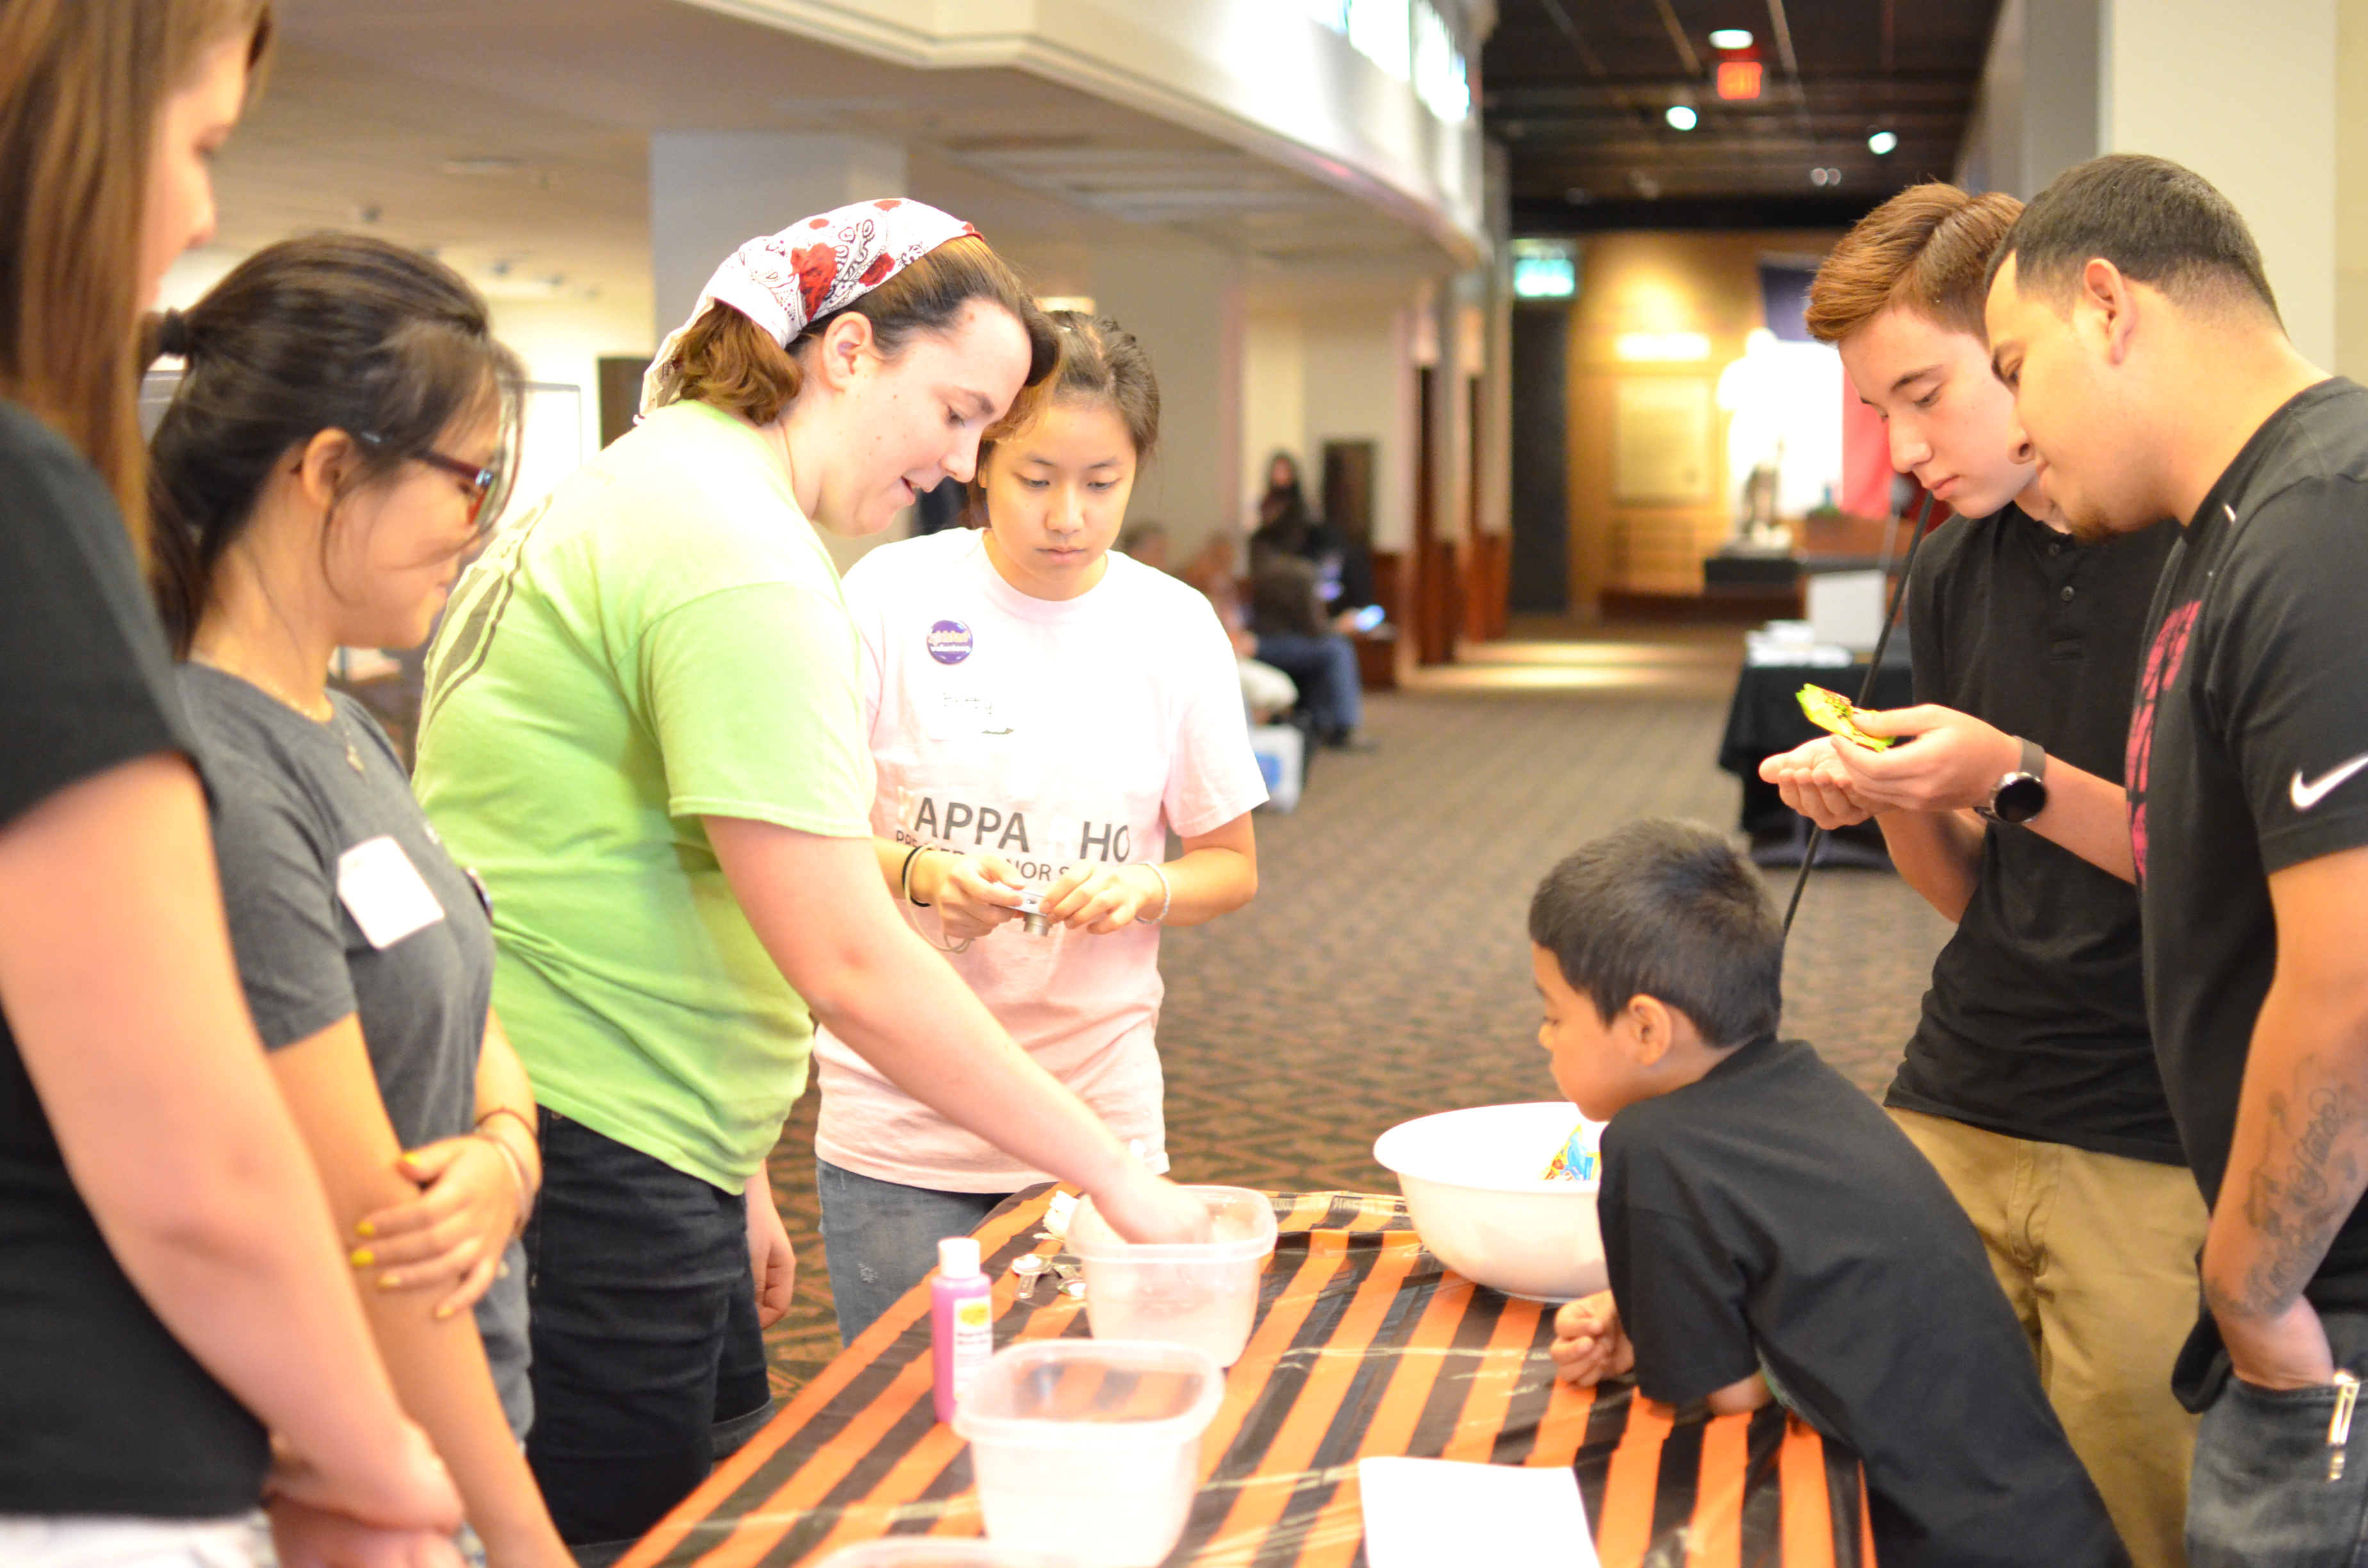 Treats, art and science activities are offered for children and families every year as part of the Bullock Museum's Spooktacular event held in conjunction with Girlstart.